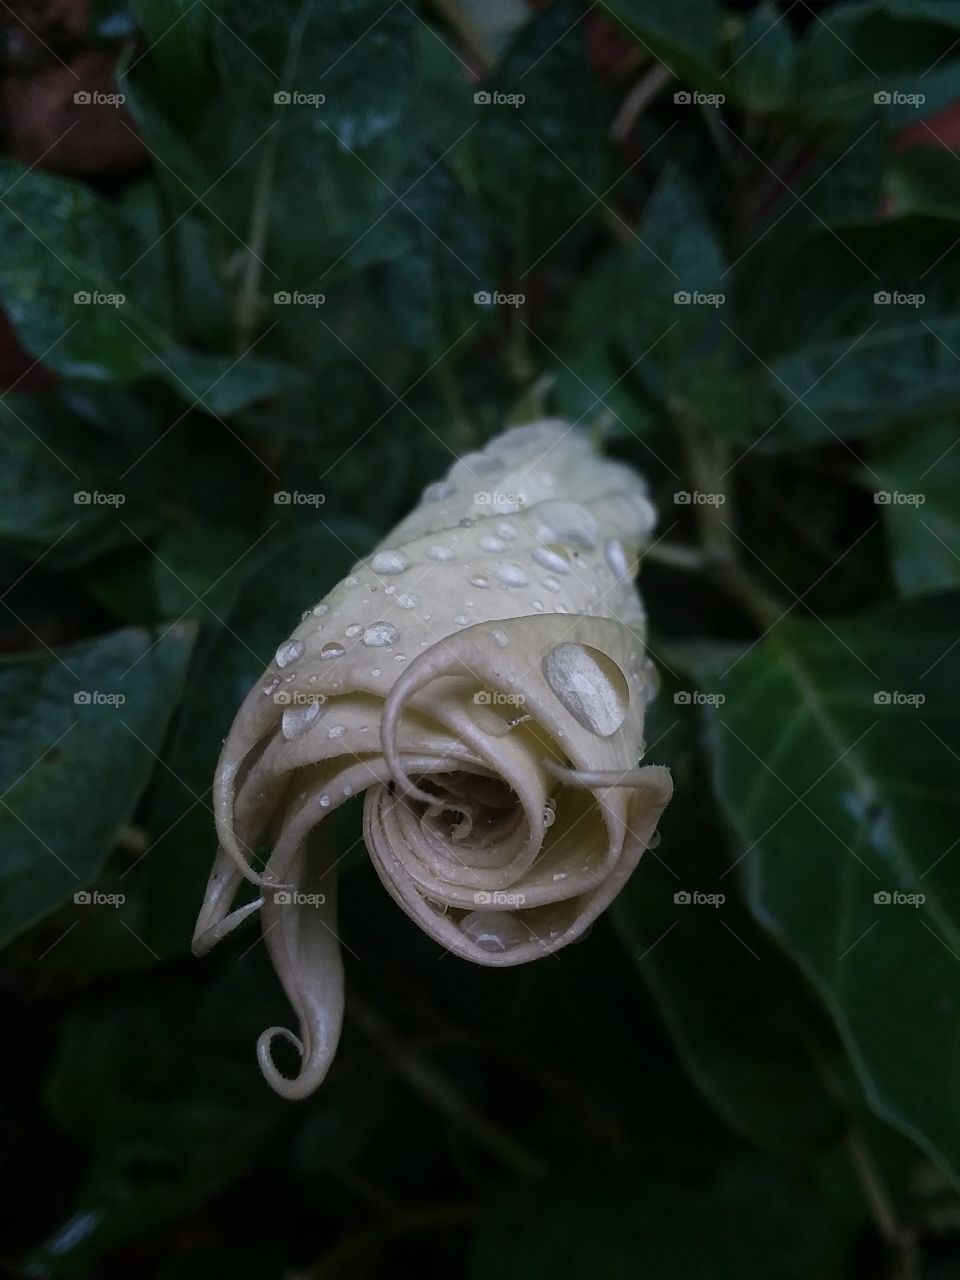 moonflower bloom after the rain